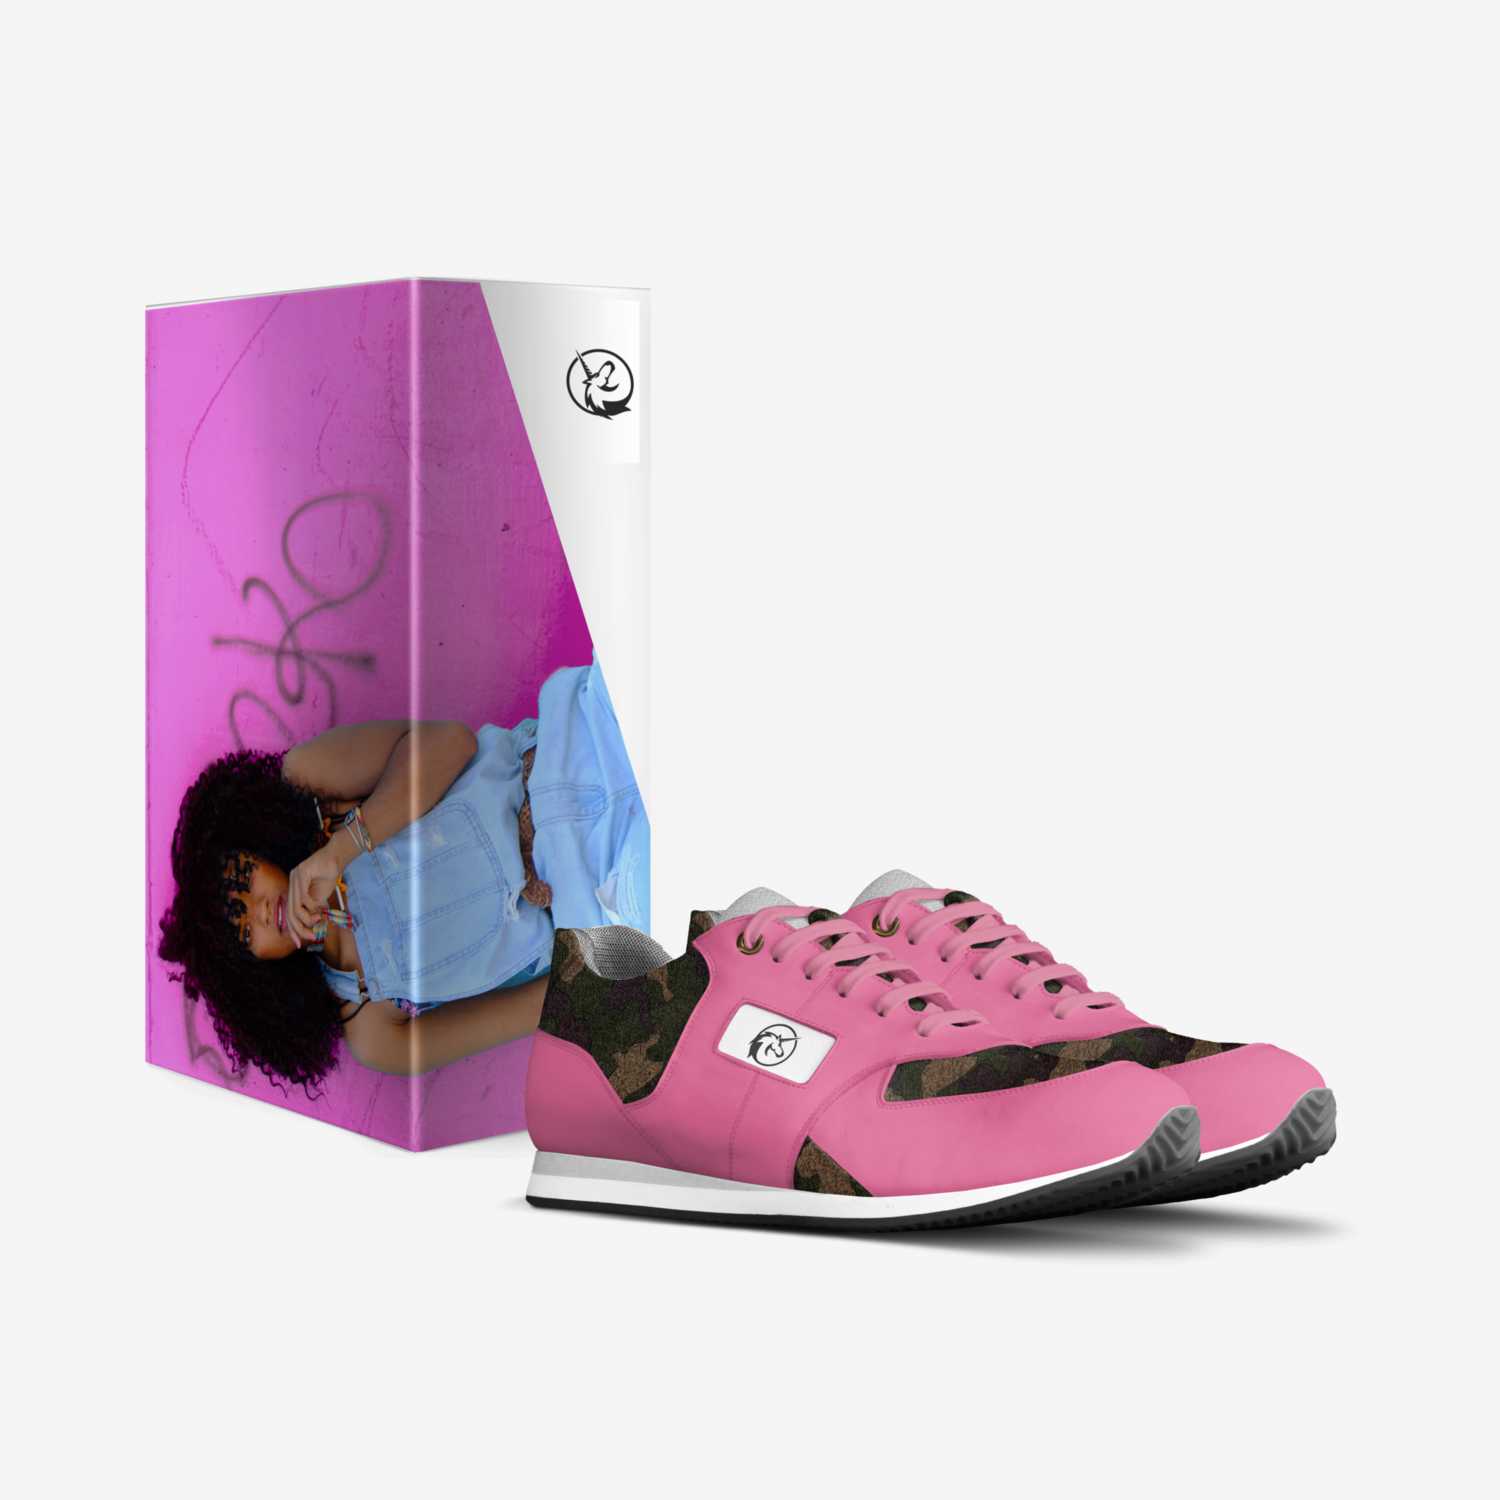 PINKY custom made in Italy shoes by Kevin Tillett | Box view